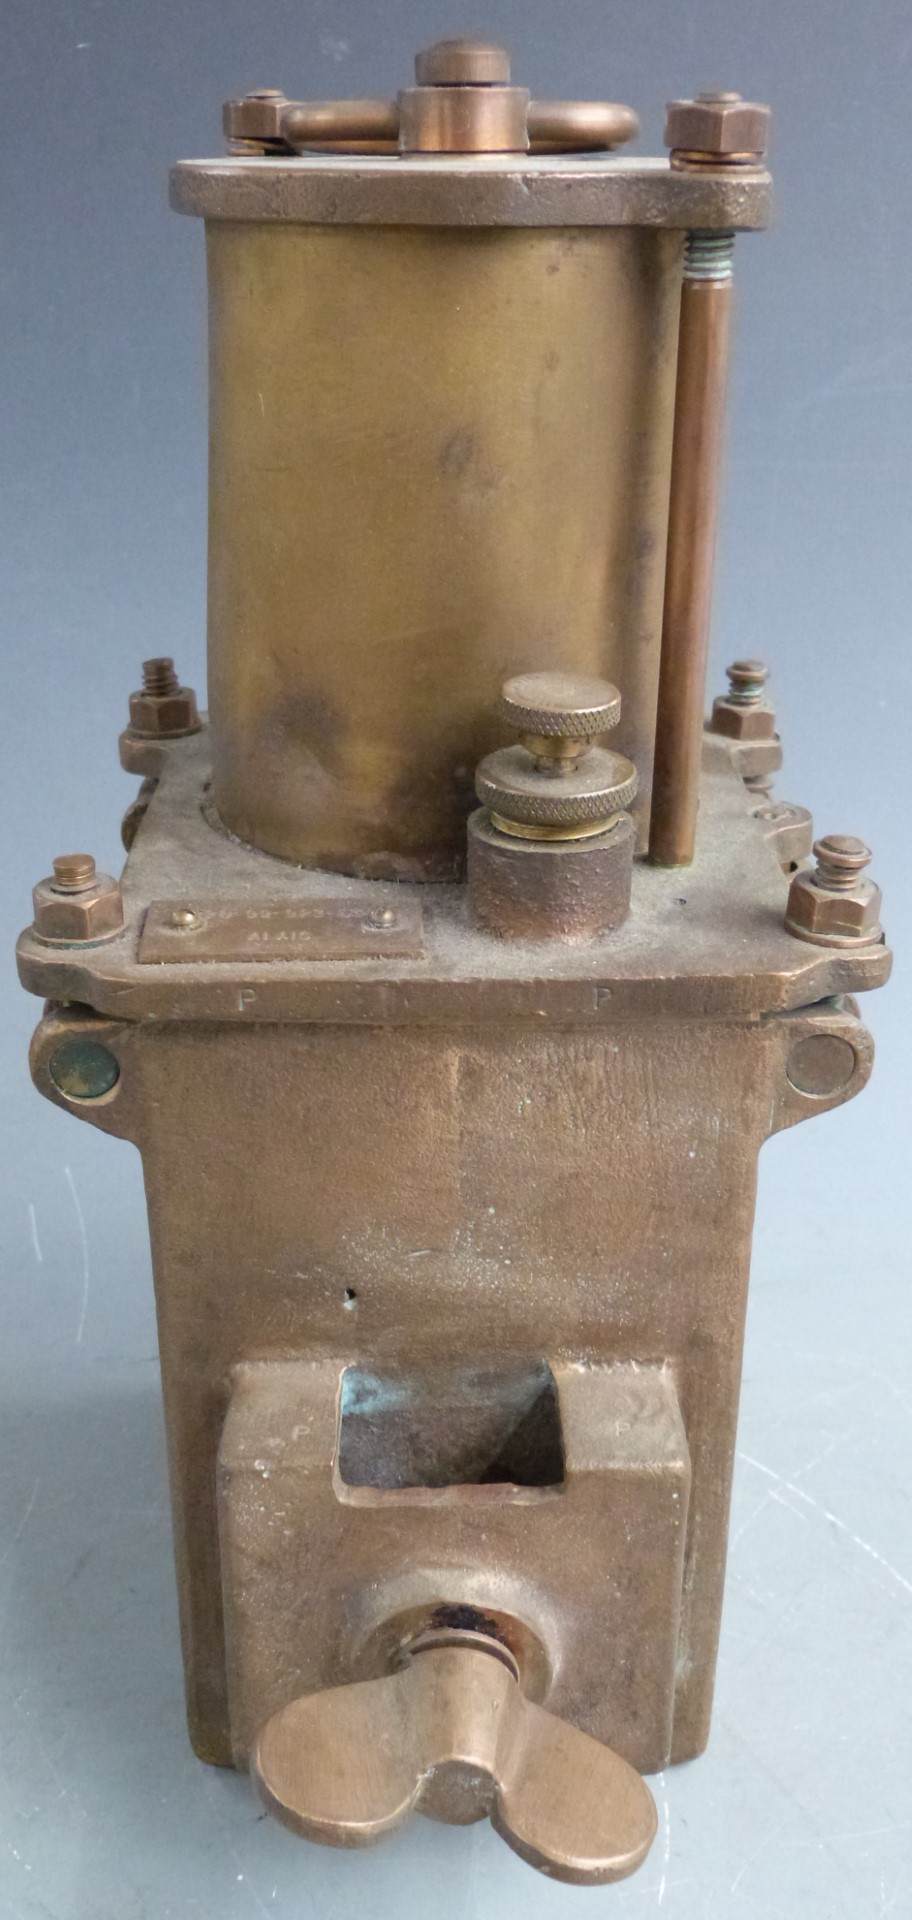 Bronze emergency navigation light for a submarine with impressed 'Alaig' and 6220-99-925-6951,